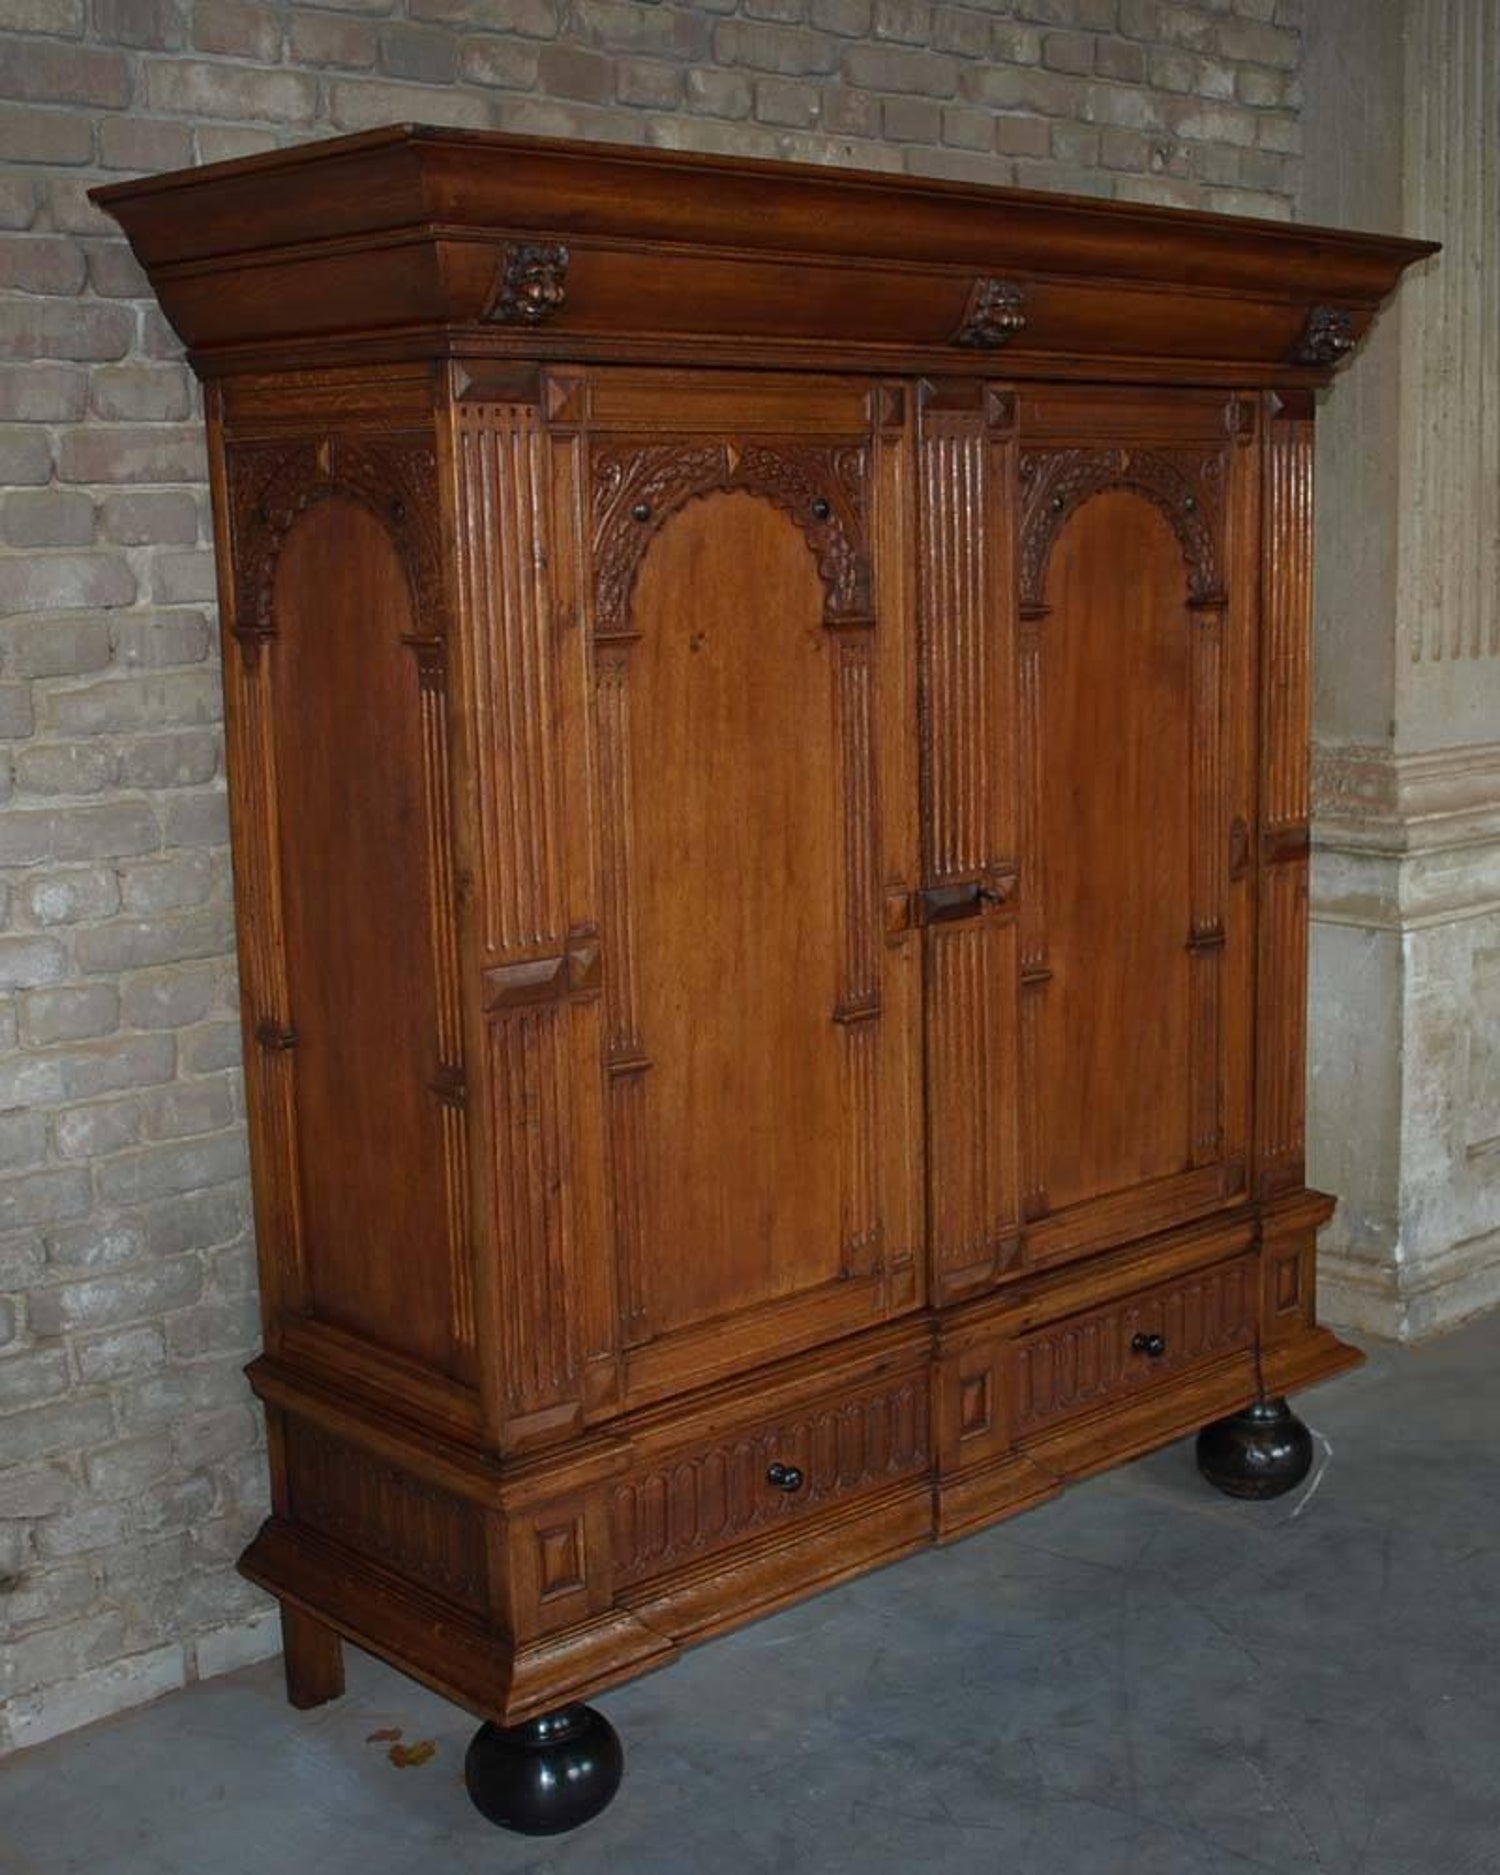 18th Century, Dutch Renaissance Cabinet For Sale at 1stDibs